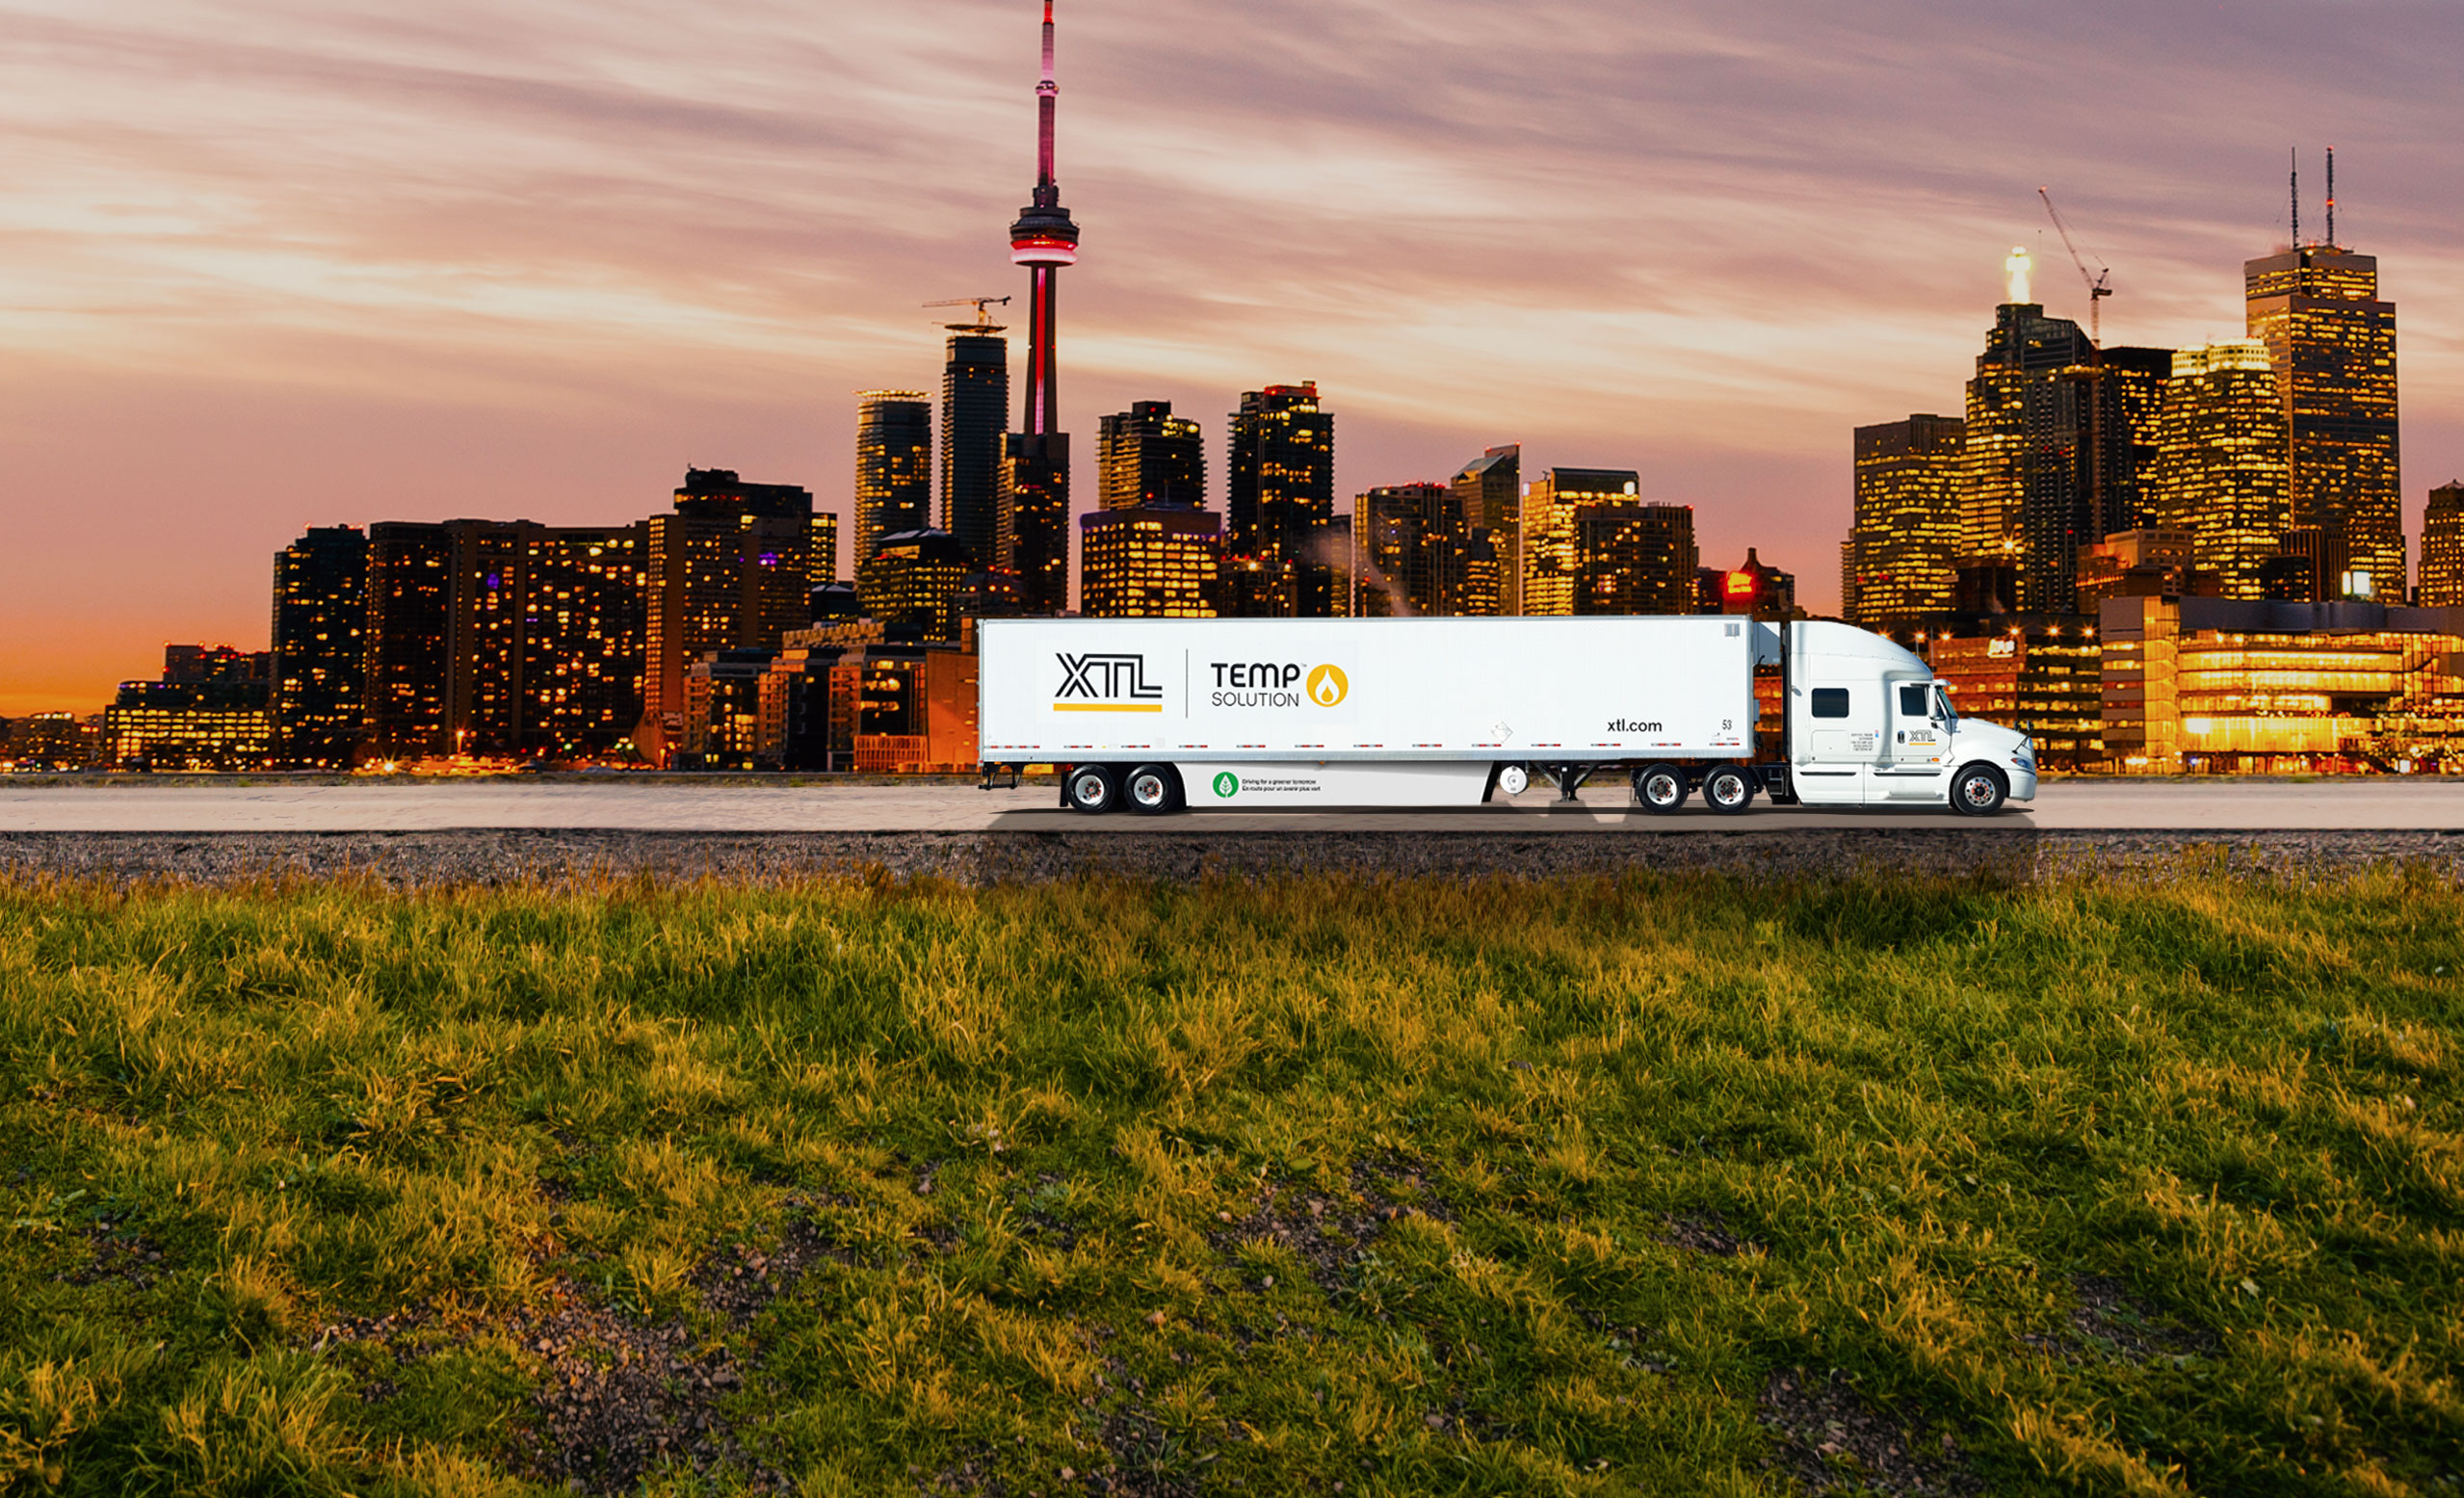 XTL transport truck and trailer driving on road, with city of Toronto in the background